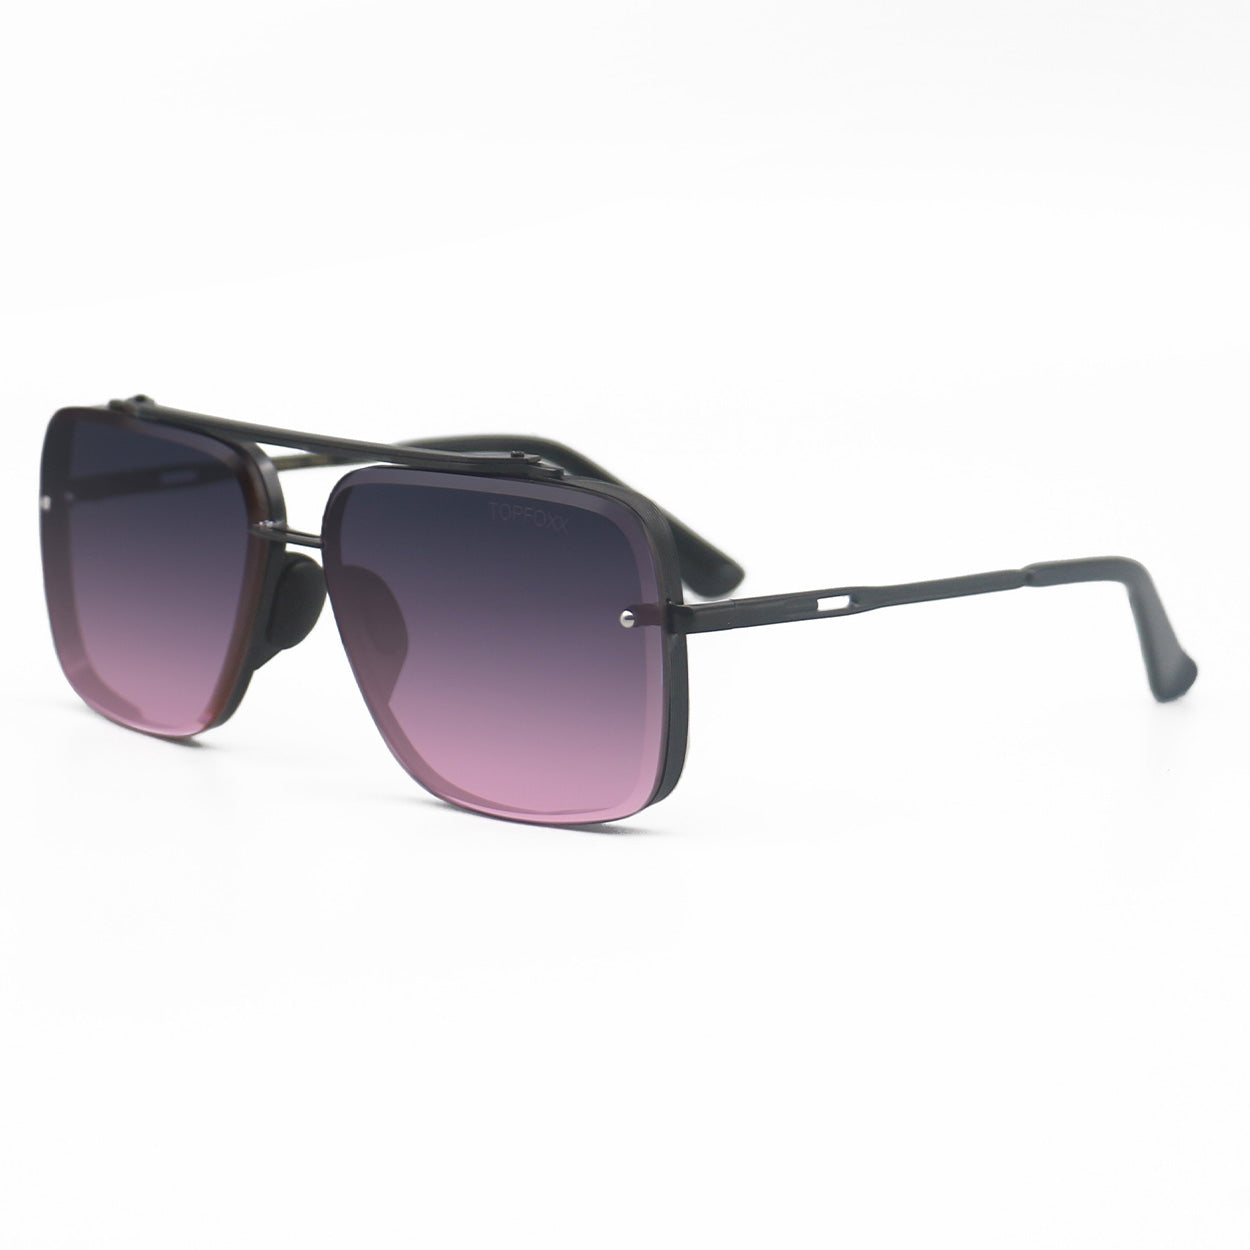 Bella Sunglasses are square aviators with faded purple to pink lenses and black metal details. Including tangle free technology.